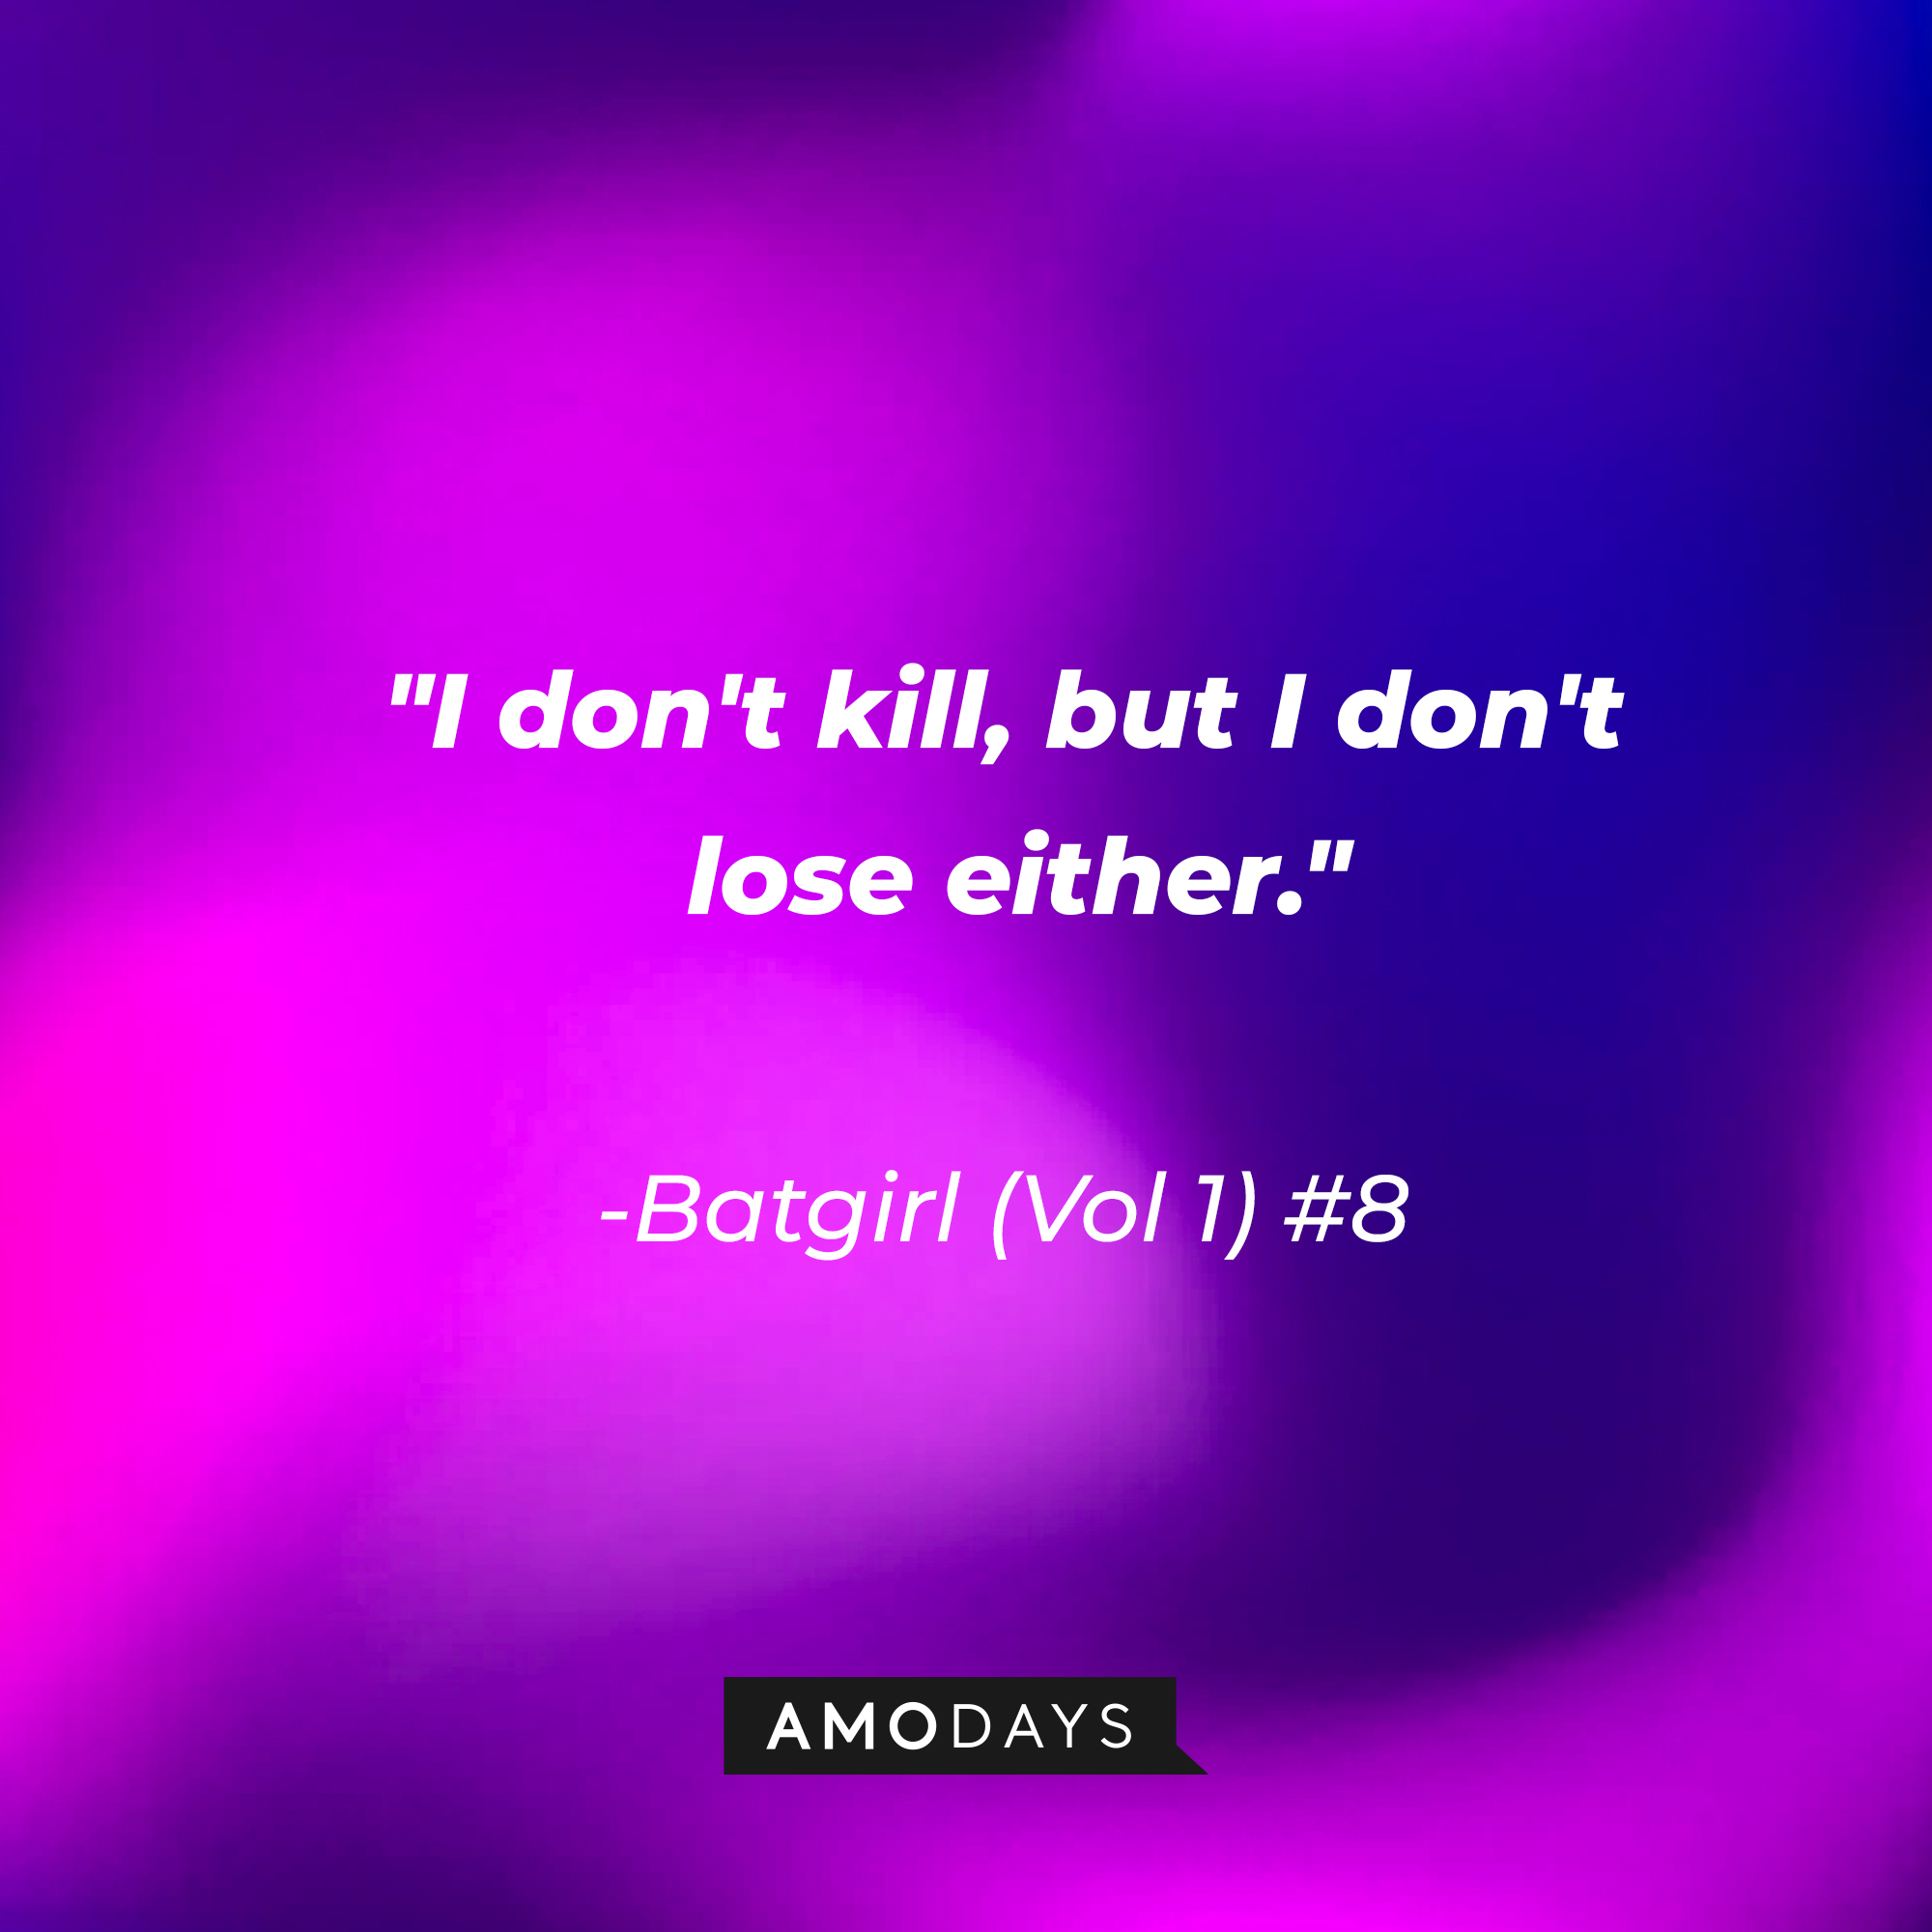 A quote from Batgirl (Vol 1) #8: "I don't kill, but I don't lose either." | Source: AmoDays